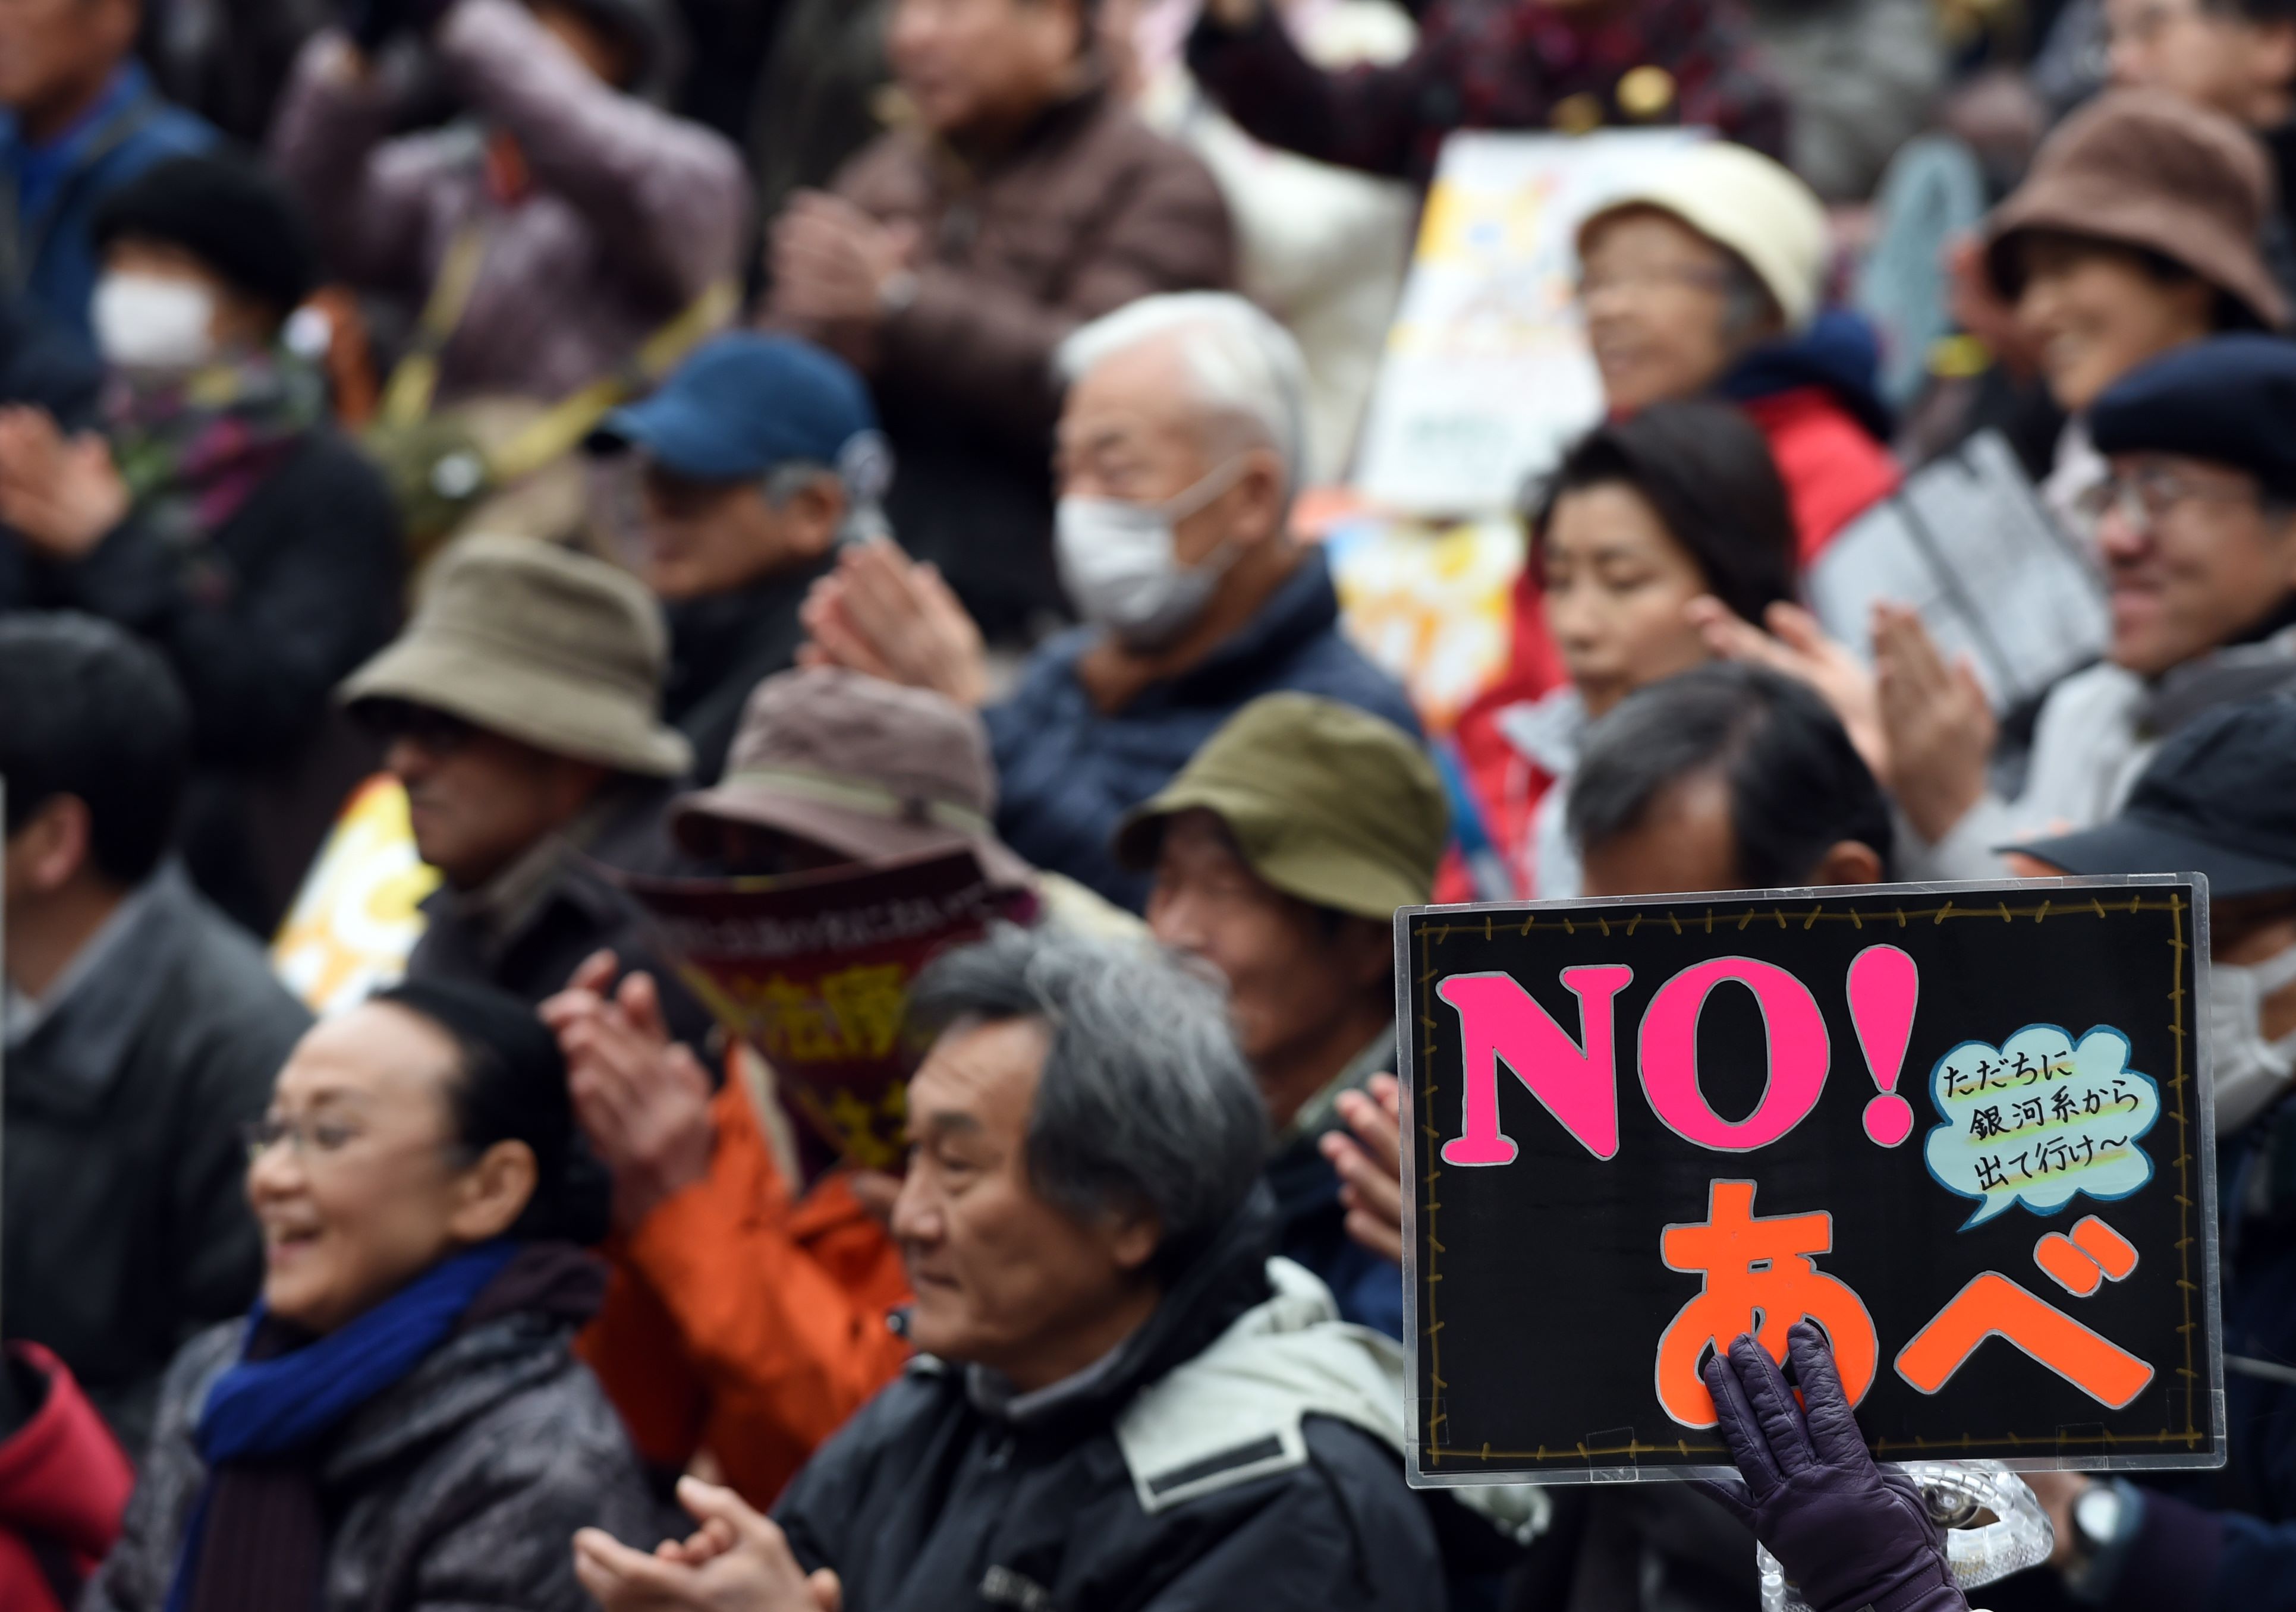 A protester holds a banner saying "No Abe" during a protest rally in Tokyo on December 6, 2015. Thousands of protesters held a "Keep Calm and No War" rally and demonstration march to protest against the contentious security bills, opening the door for Japanese troops to engage in combat overseas for the first time since the end of World War II. AFP PHOTO / TOSHIFUMI KITAMURA